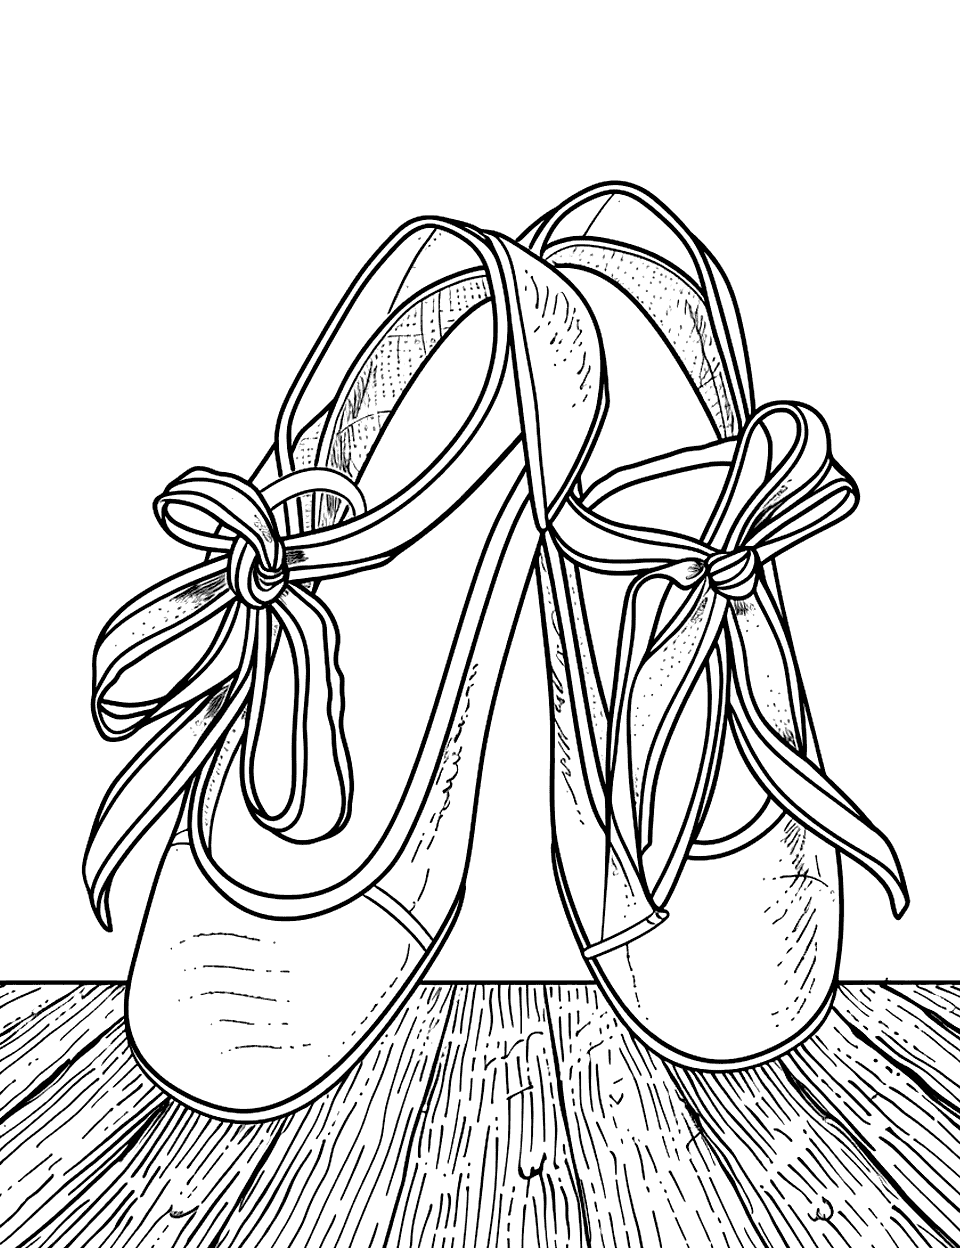 Ballet Slippers Performance Shoe Coloring Page - A single pair of ballet slippers with ribbons unfurling against a simple wooden floor background.